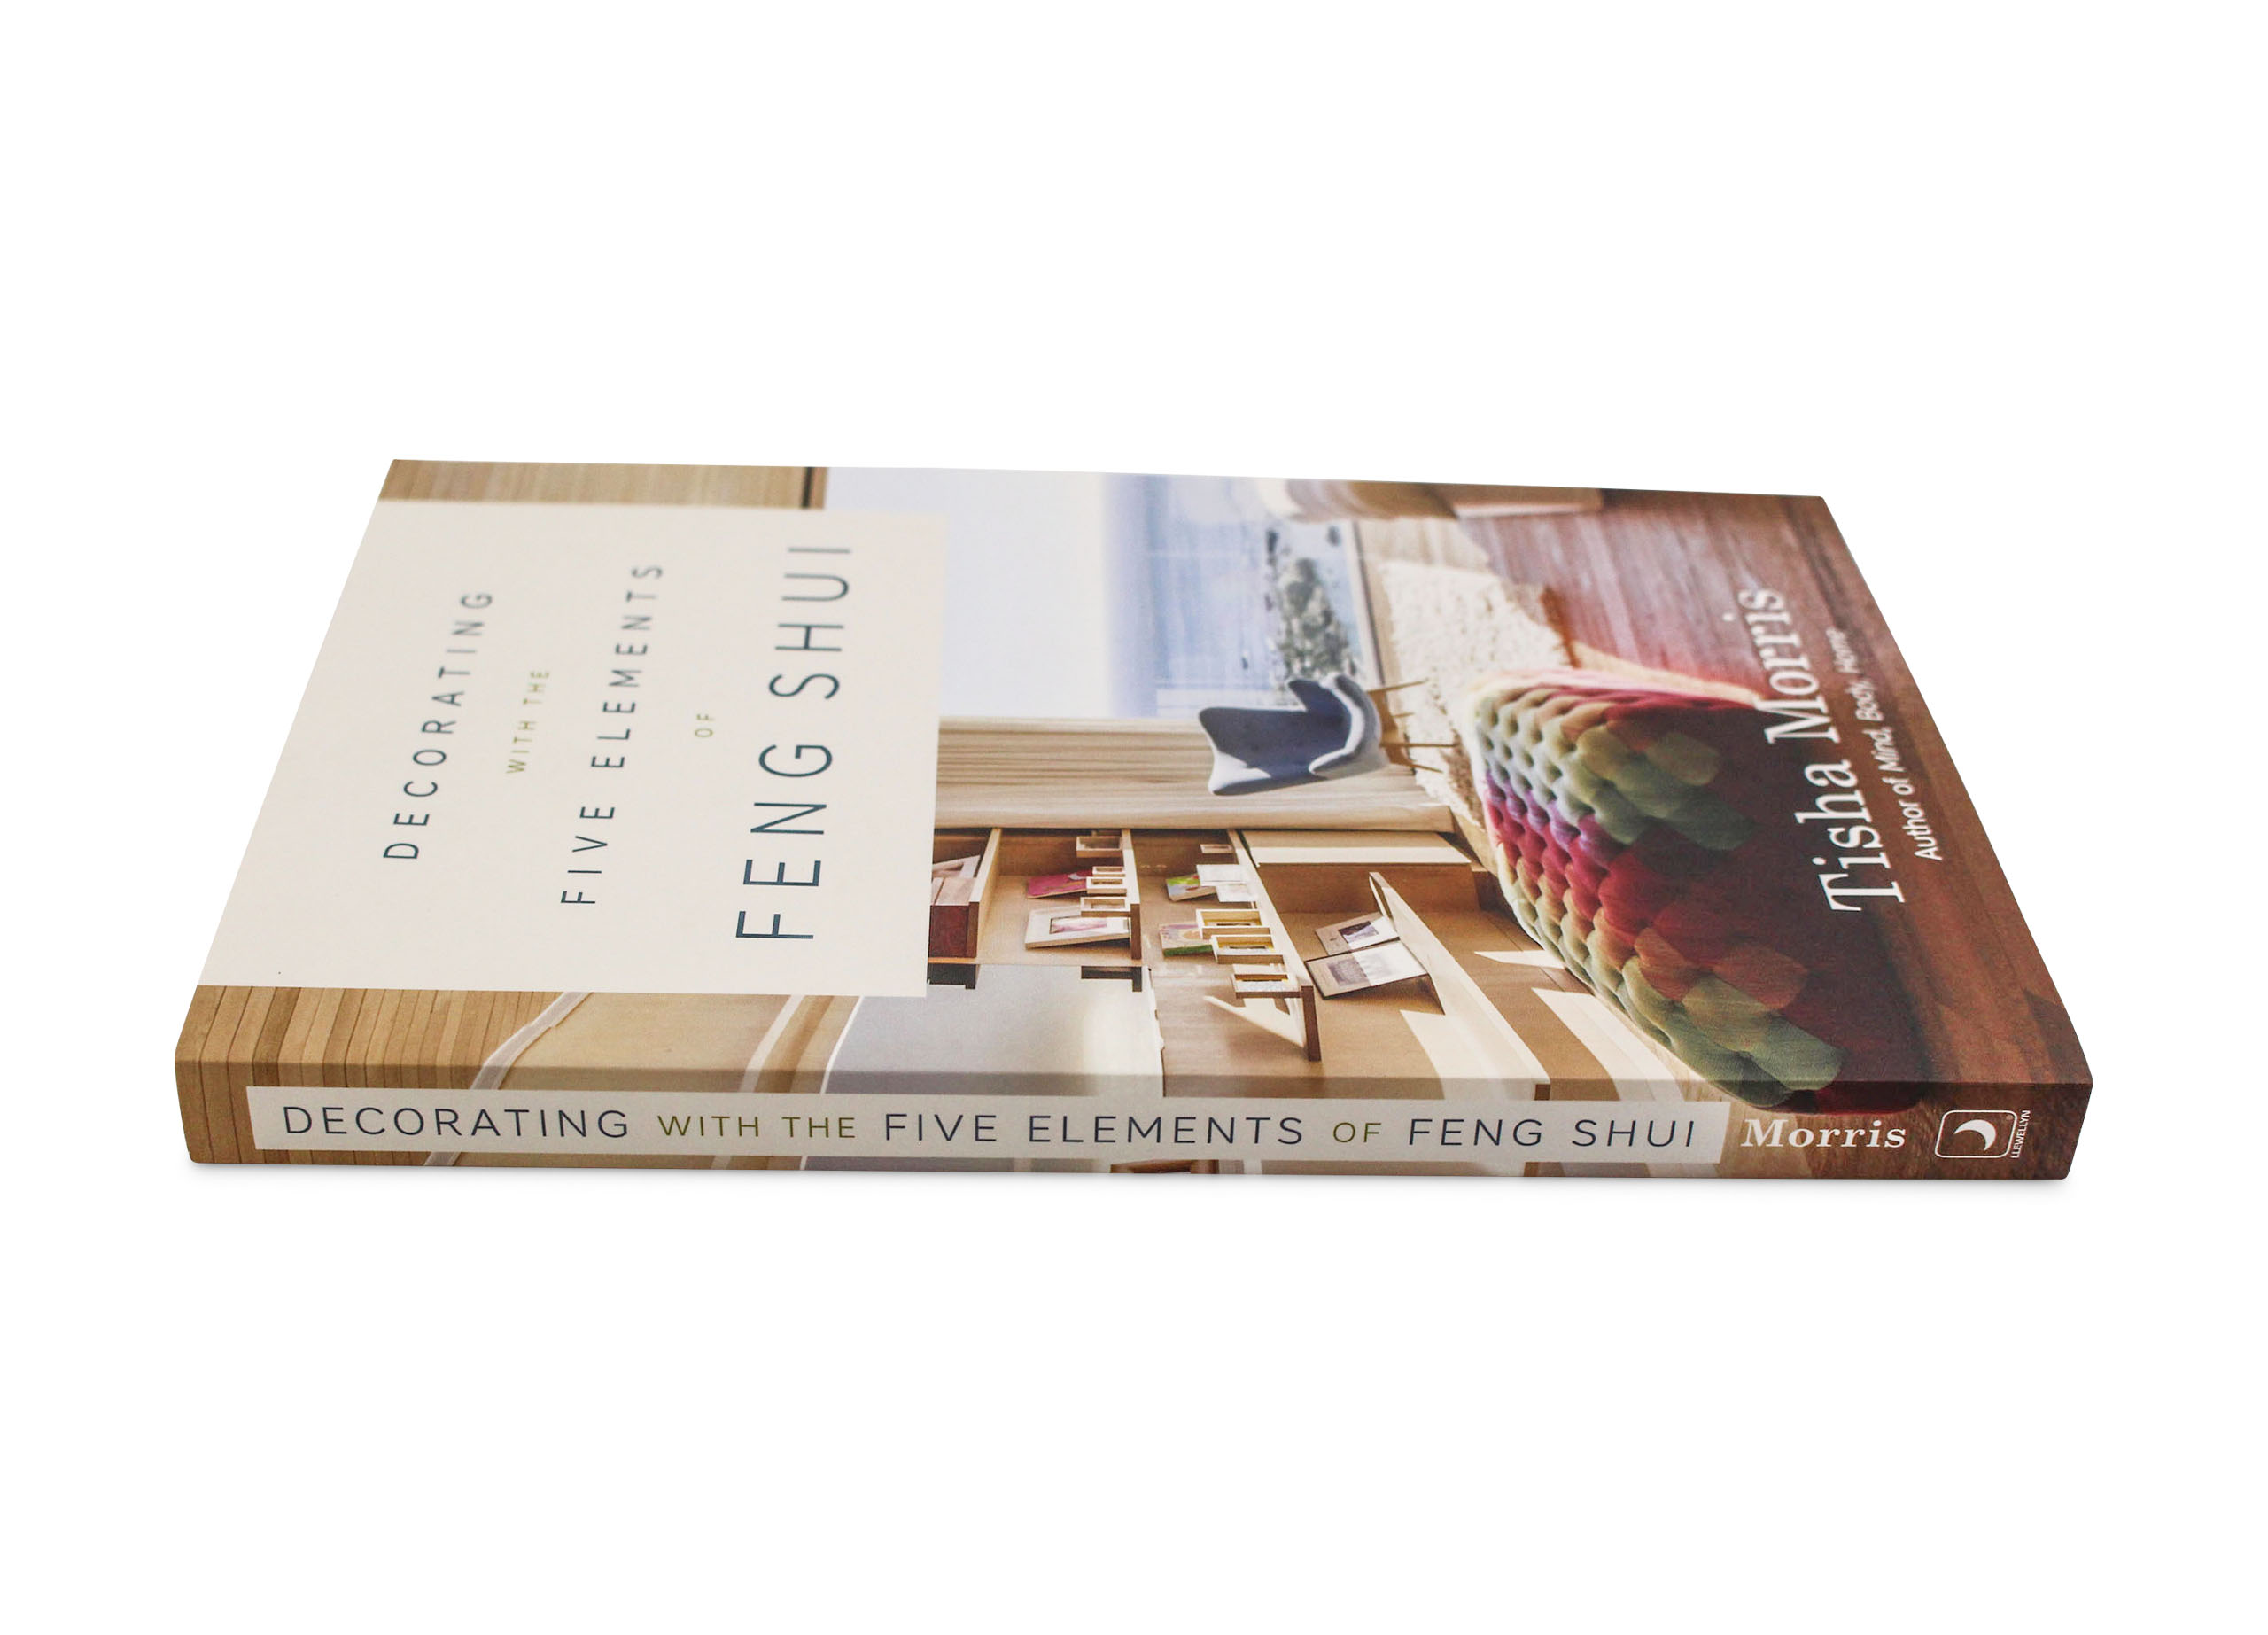 Decorating With the Five Elements of Feng Shui Book - Crystal Dreams